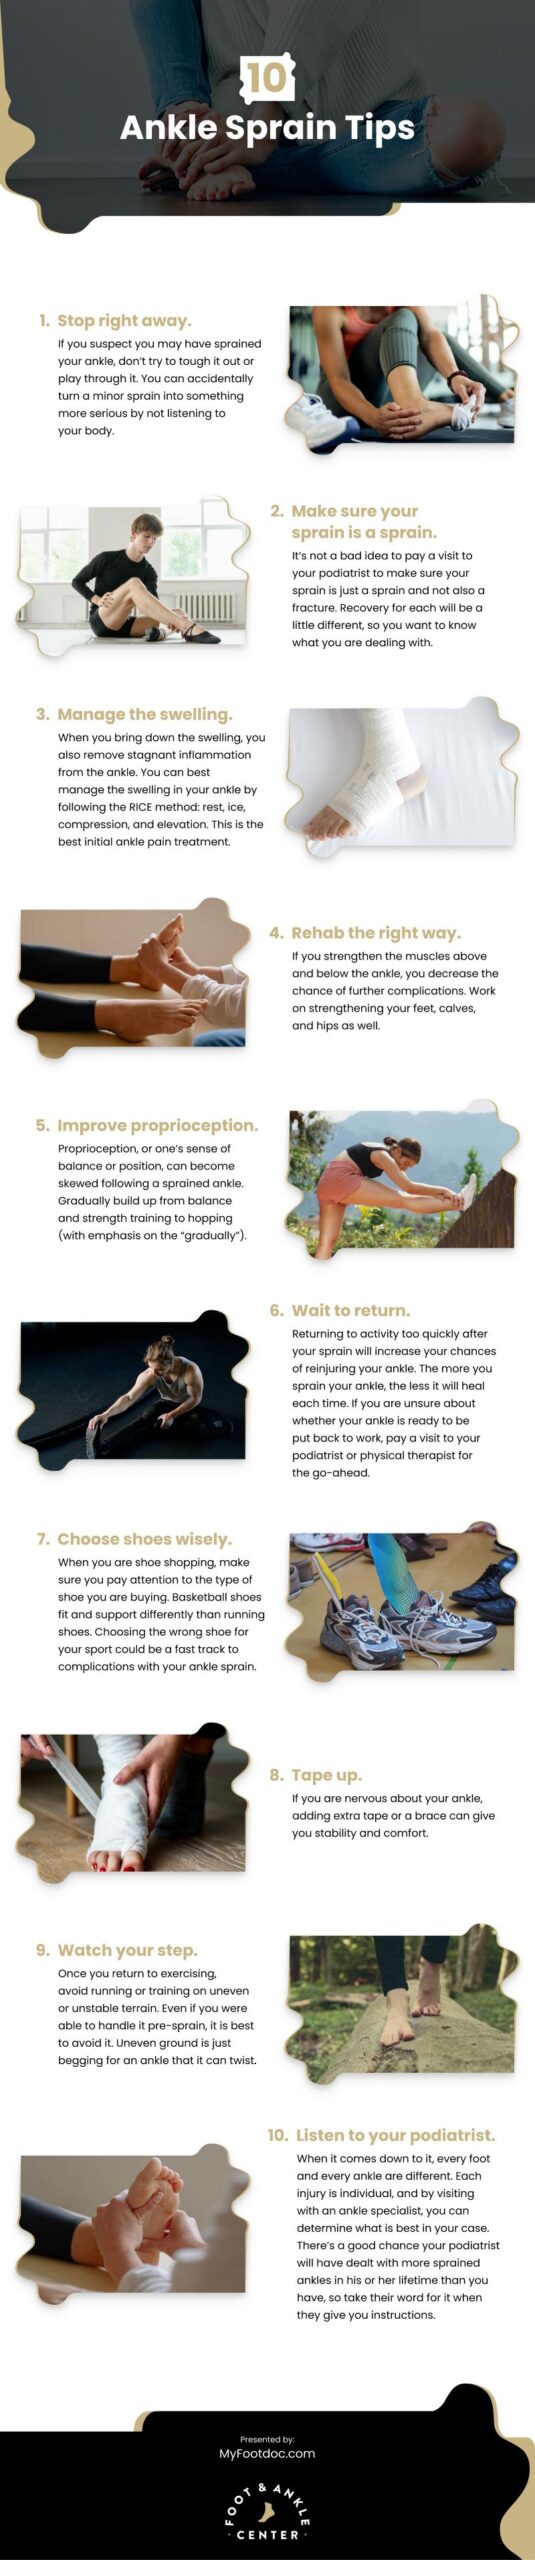 10 Ankle Sprain Tips Infographic